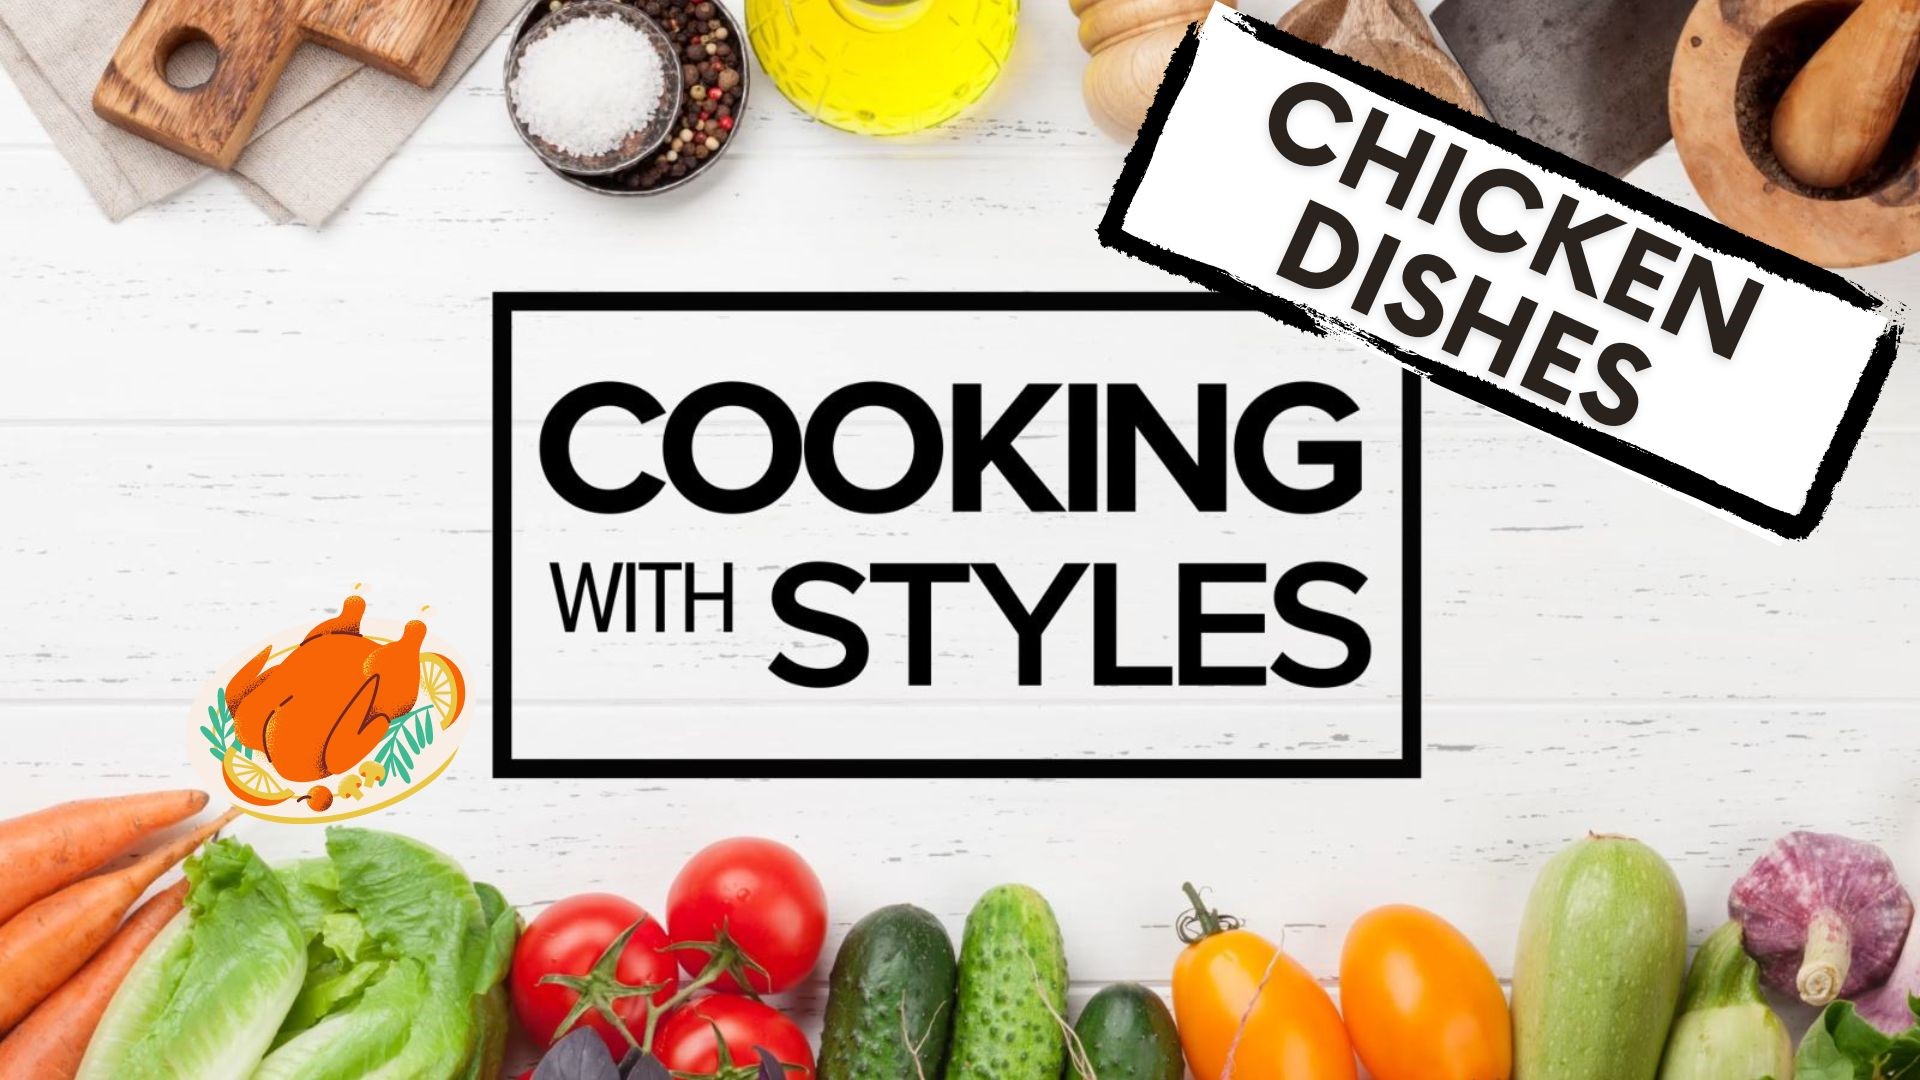 KFMB's Shawn Styles shares a collection of recipes to make your classic chicken dinners more exciting, while keep it simple and easy for you.